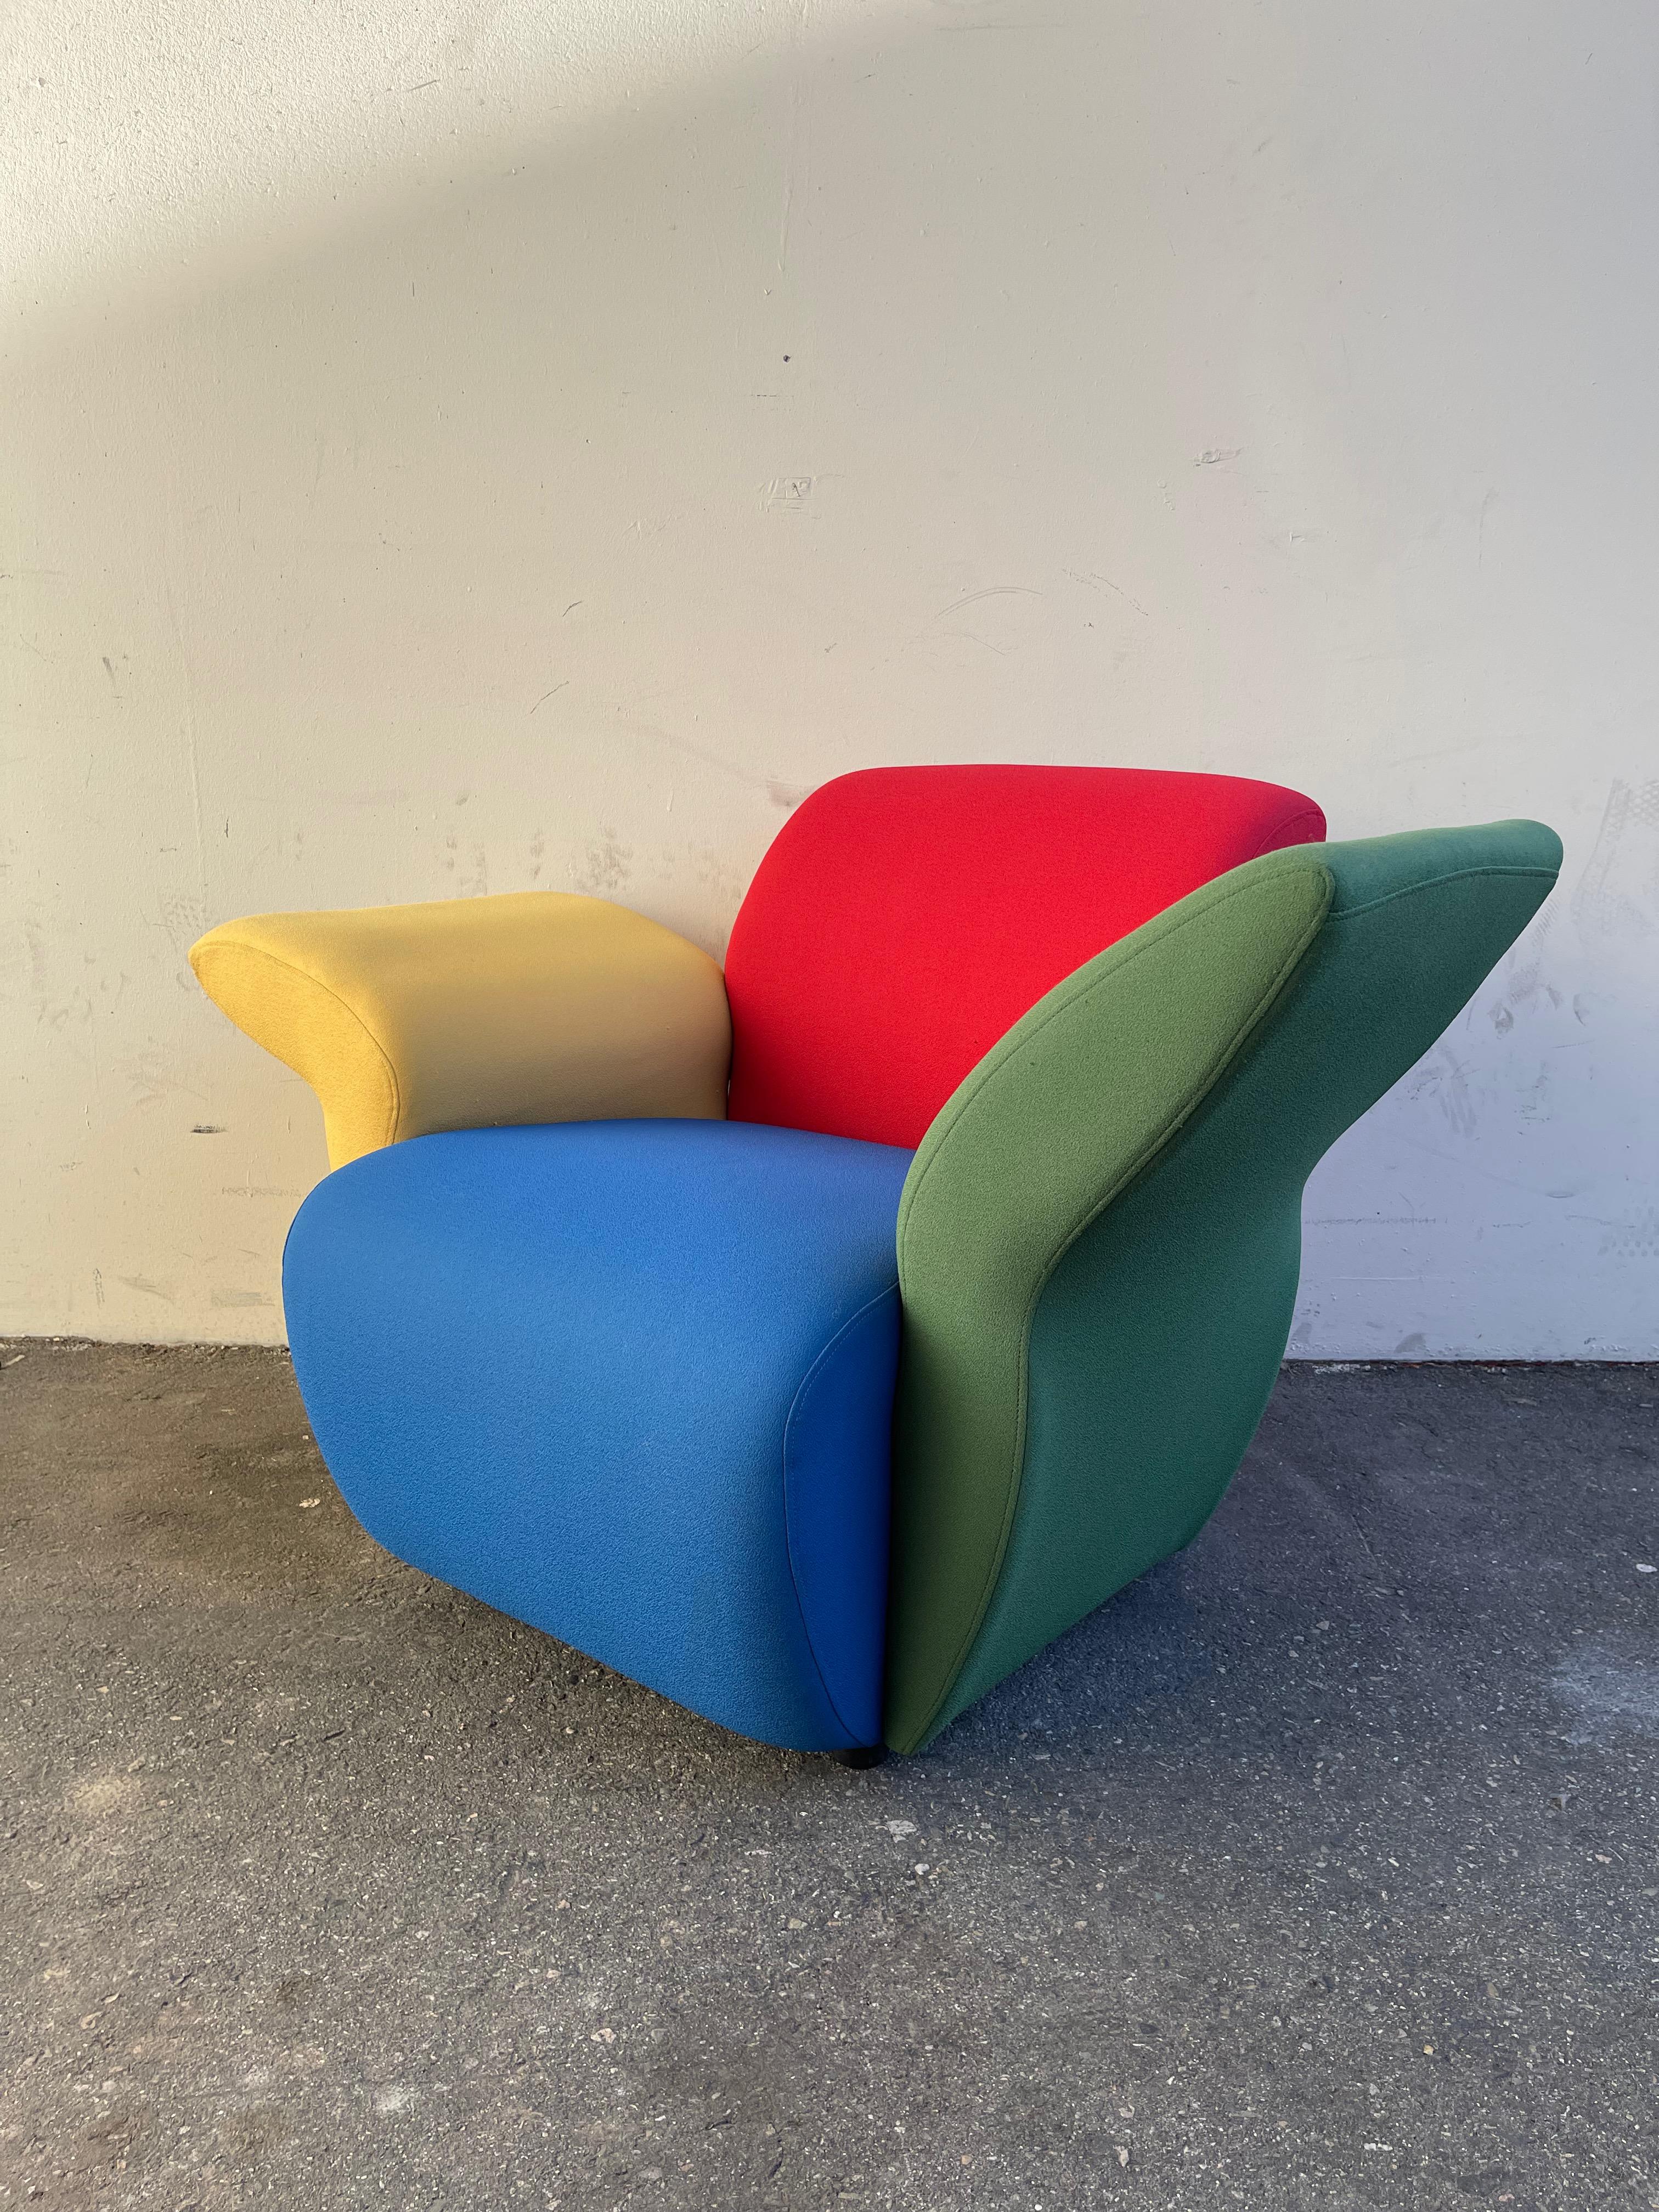 Canadian Postmodern Multicolor Lounge Chairs by David Burry, Montreal, 1980s For Sale